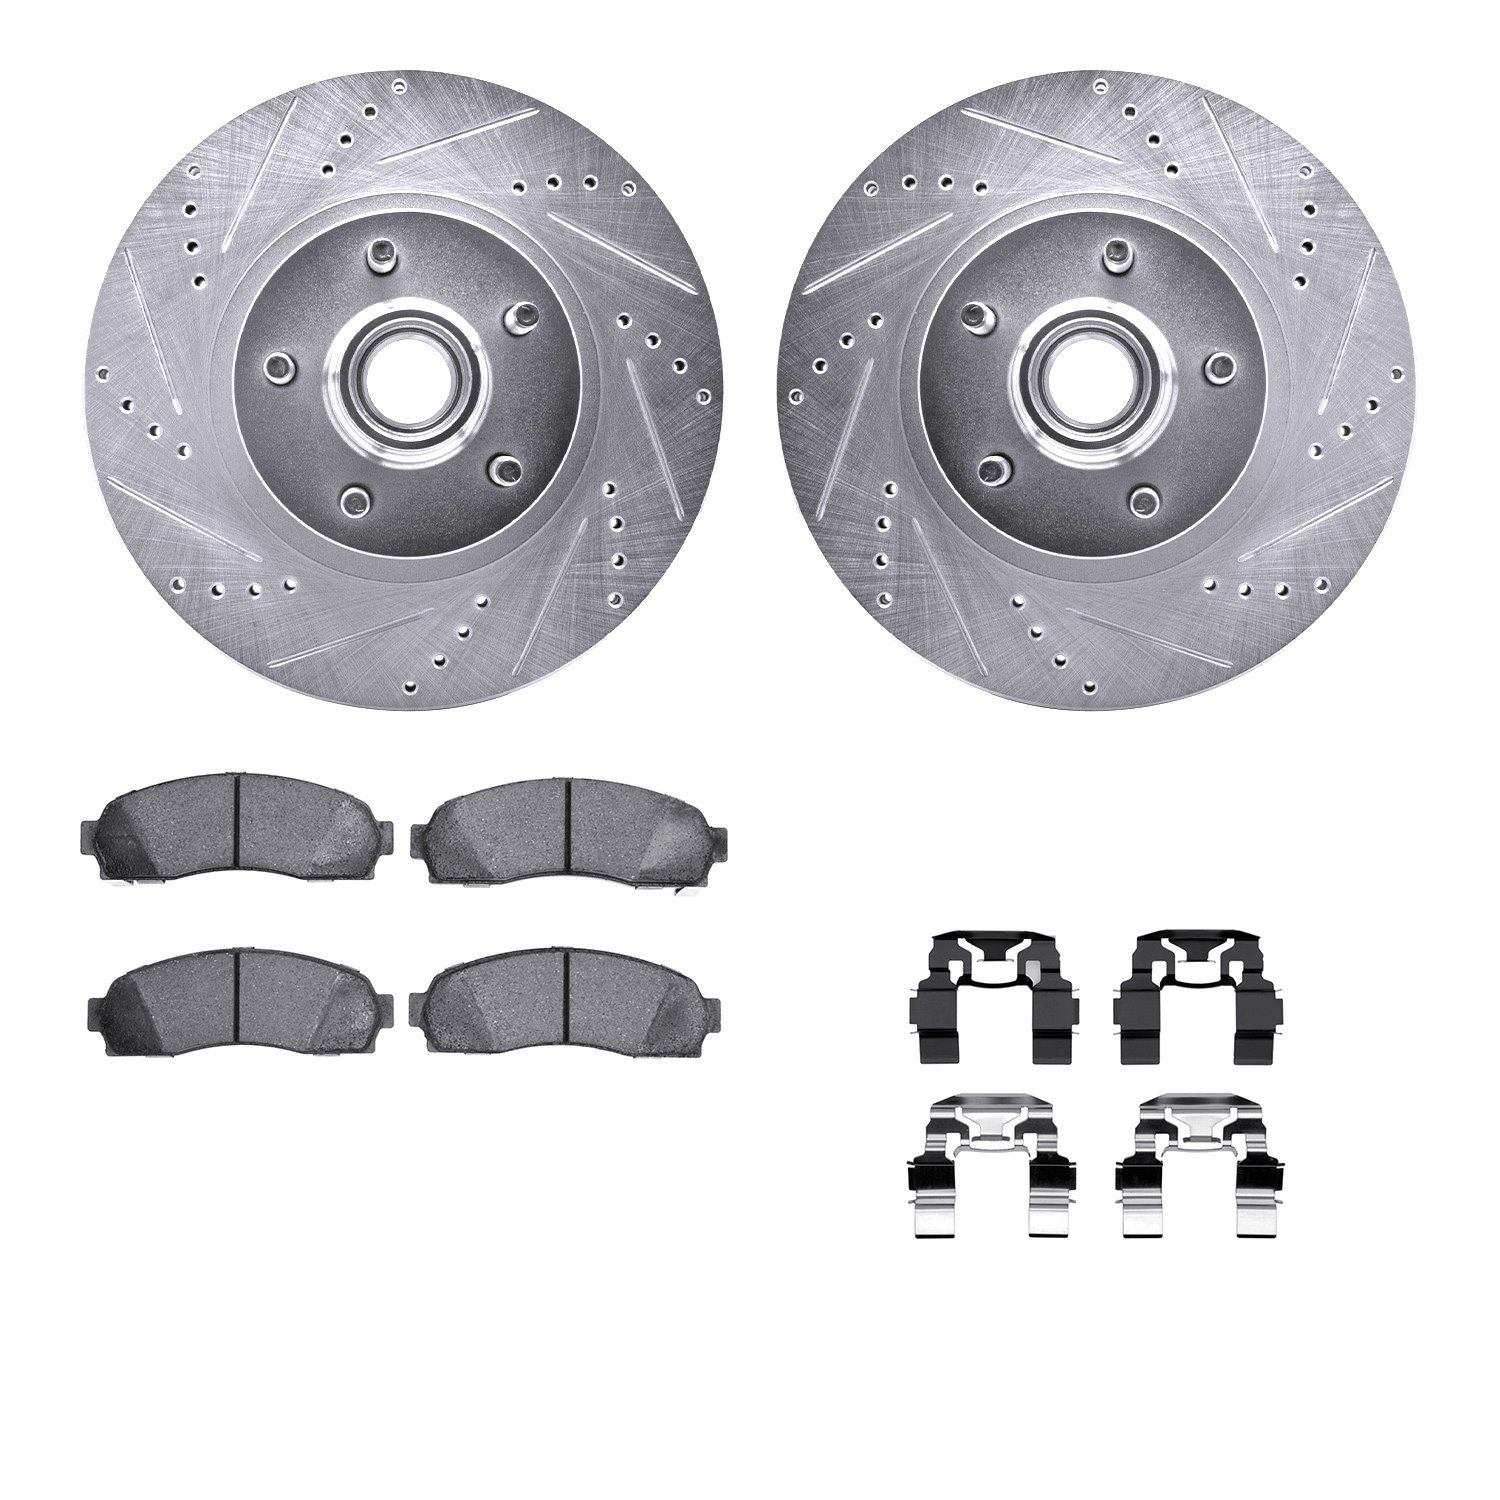 7212-99165 Drilled/Slotted Rotors w/Heavy-Duty Brake Pads Kit & Hardware [Silver], 2001-2005 Ford/Lincoln/Mercury/Mazda, Positio